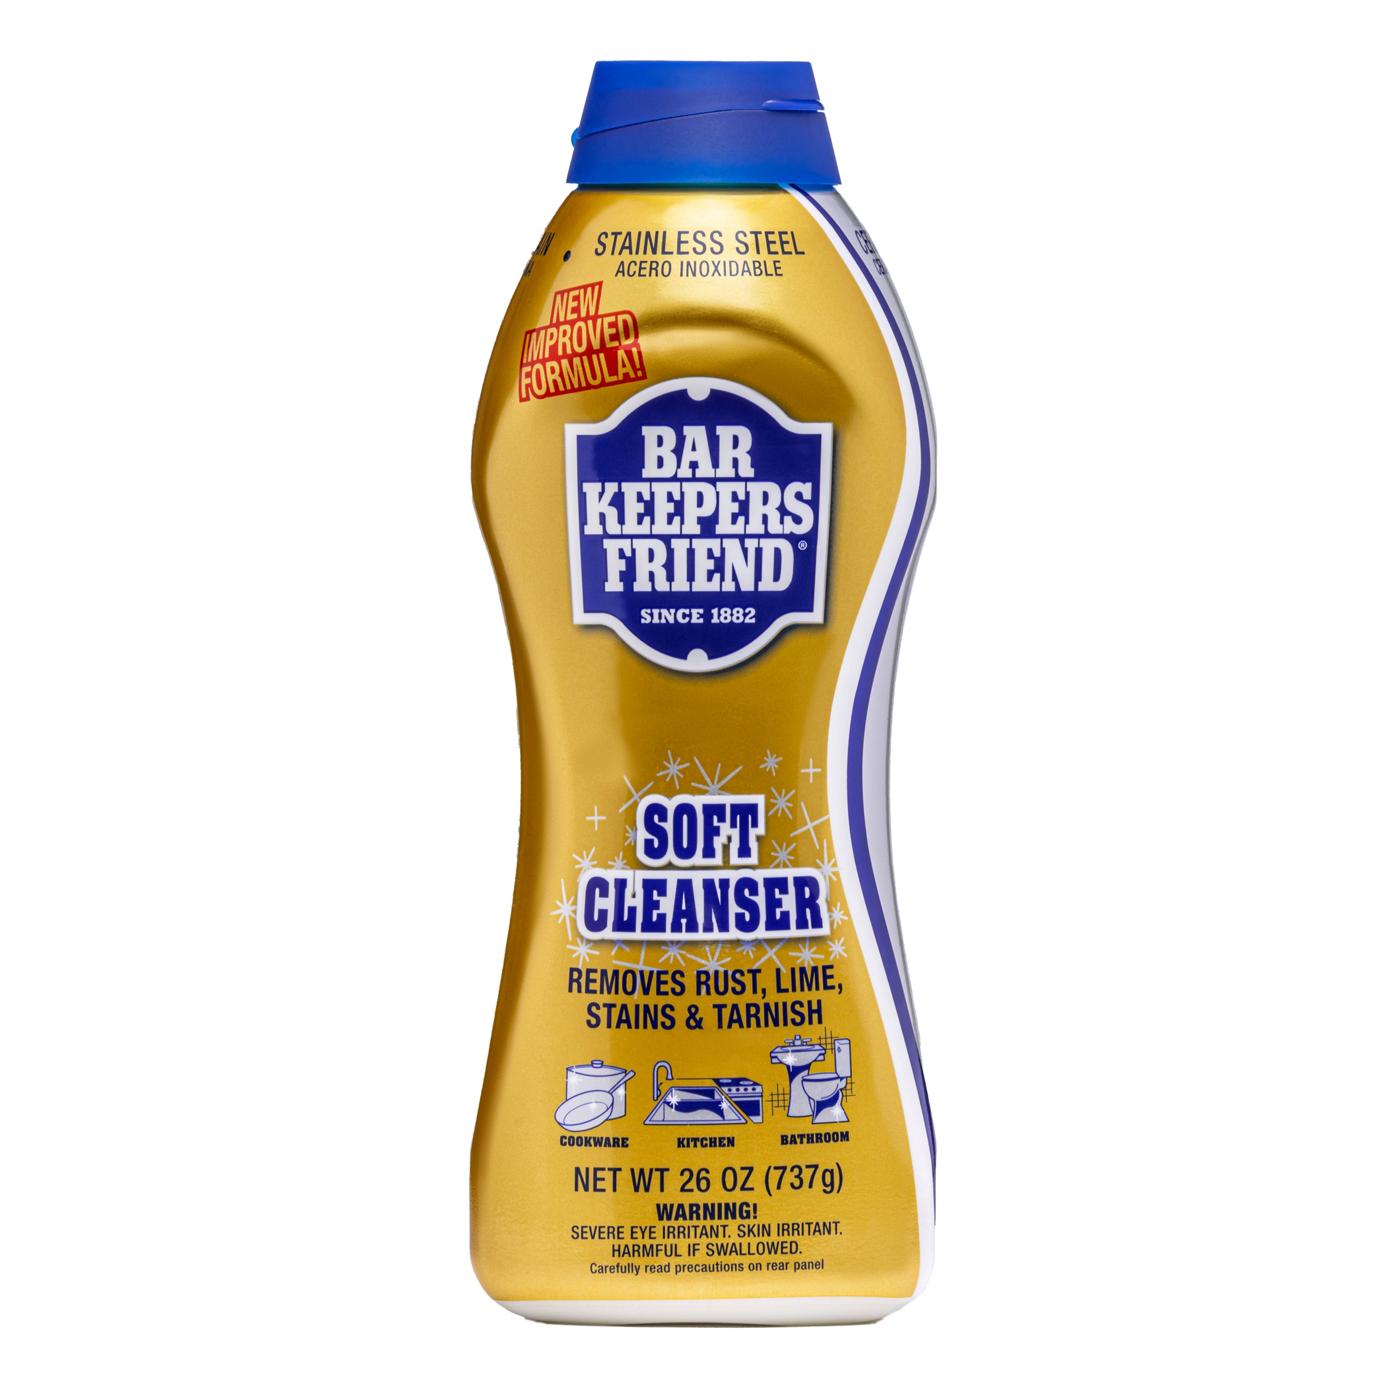 Bar Keepers Friend Soft Cleanser - Shop All Purpose Cleaners at H-E-B